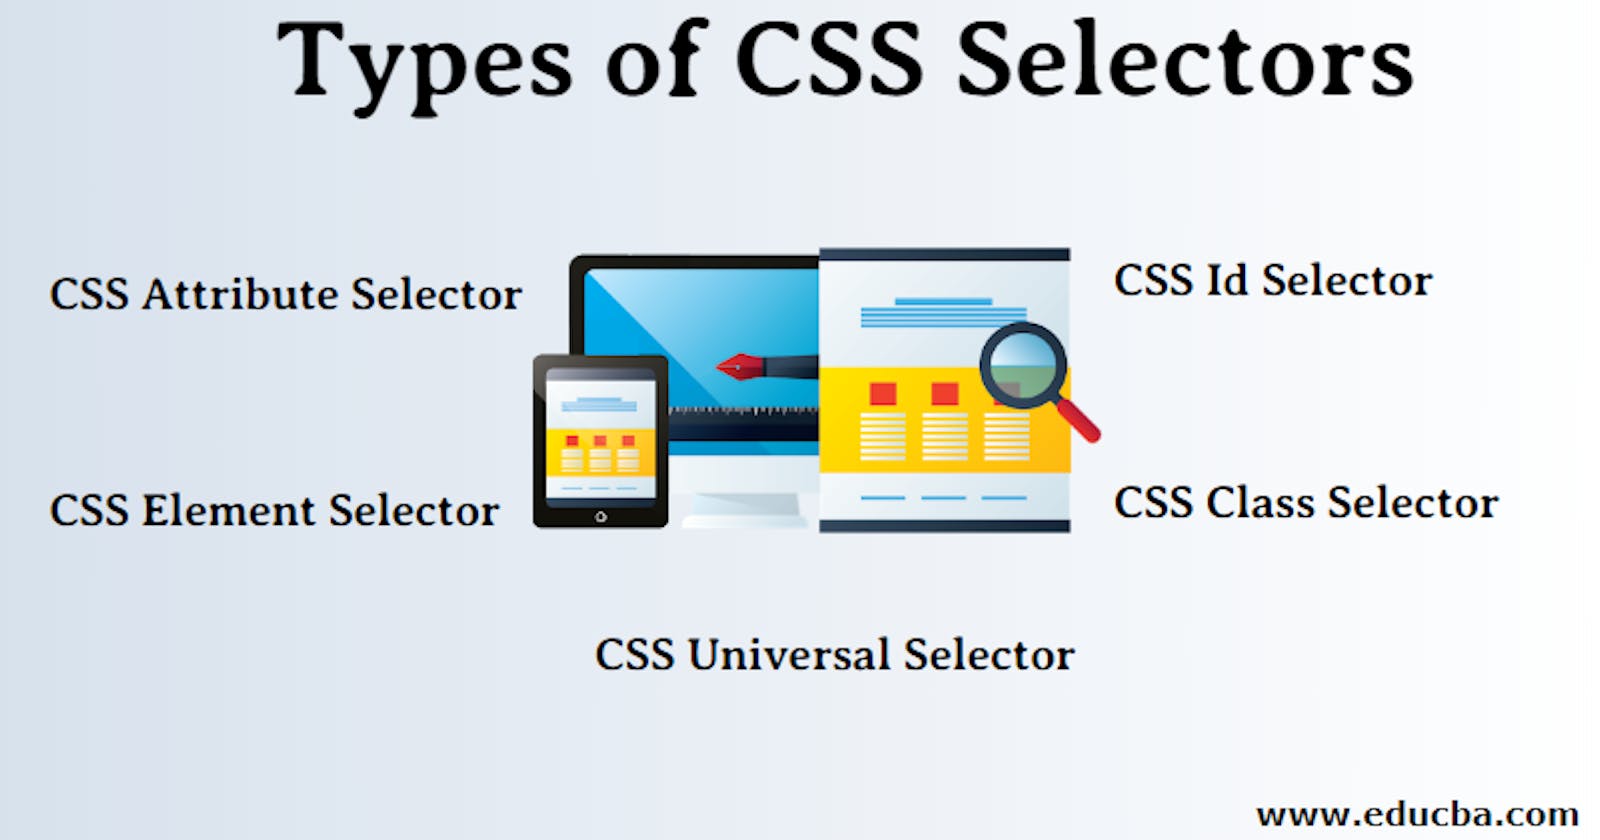 Detail guide on CSS Selector